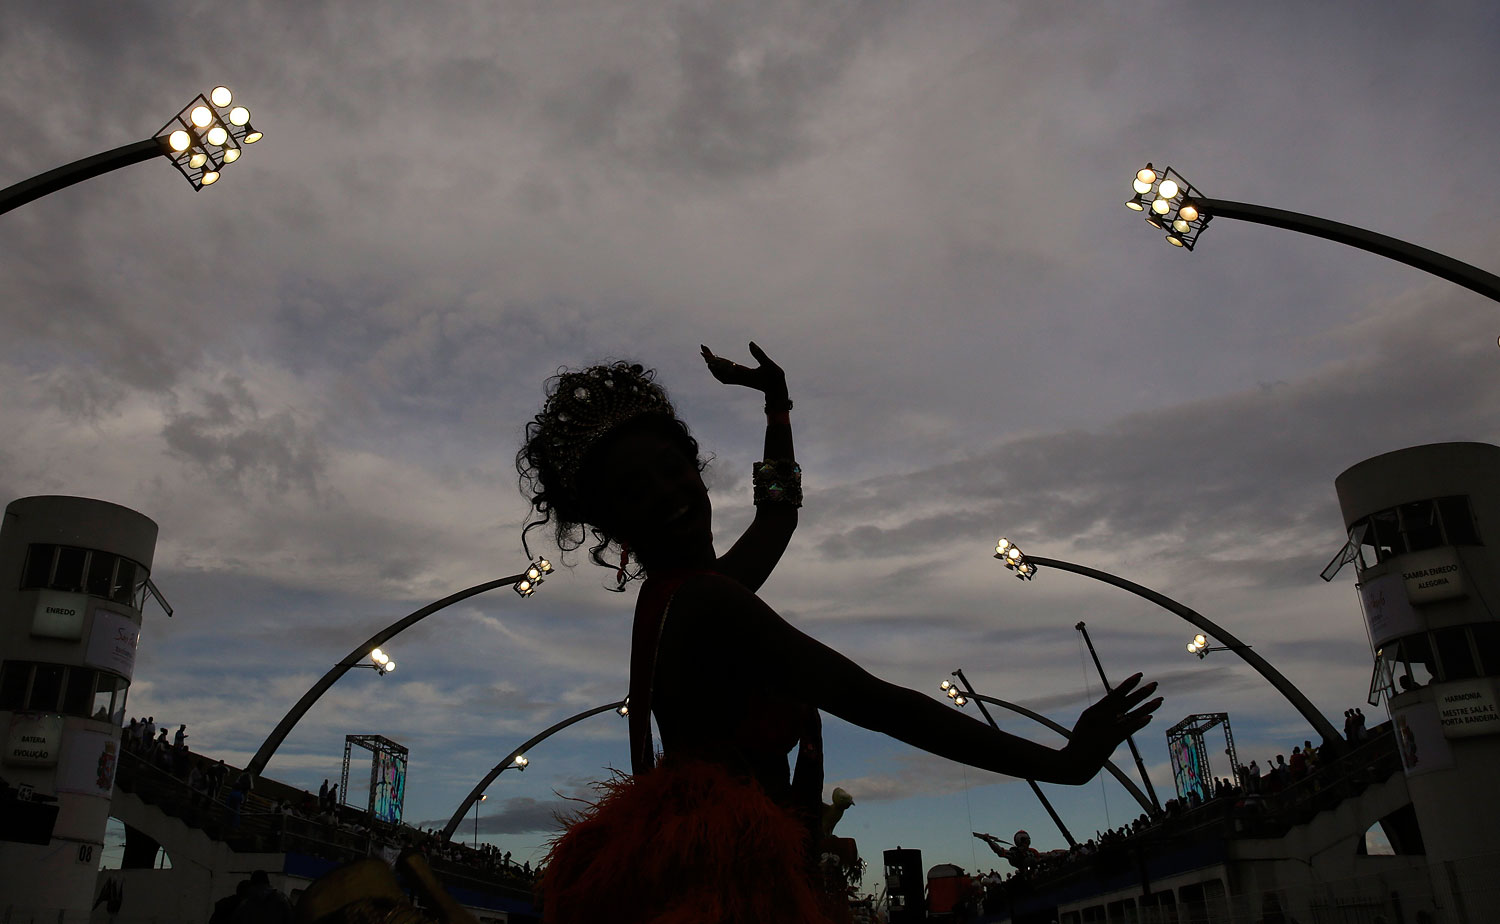 A dancer from the Tom Maior samba school performs during a carnival parade in Sao Paulo, Brazil, Saturday, March 1, 2014.